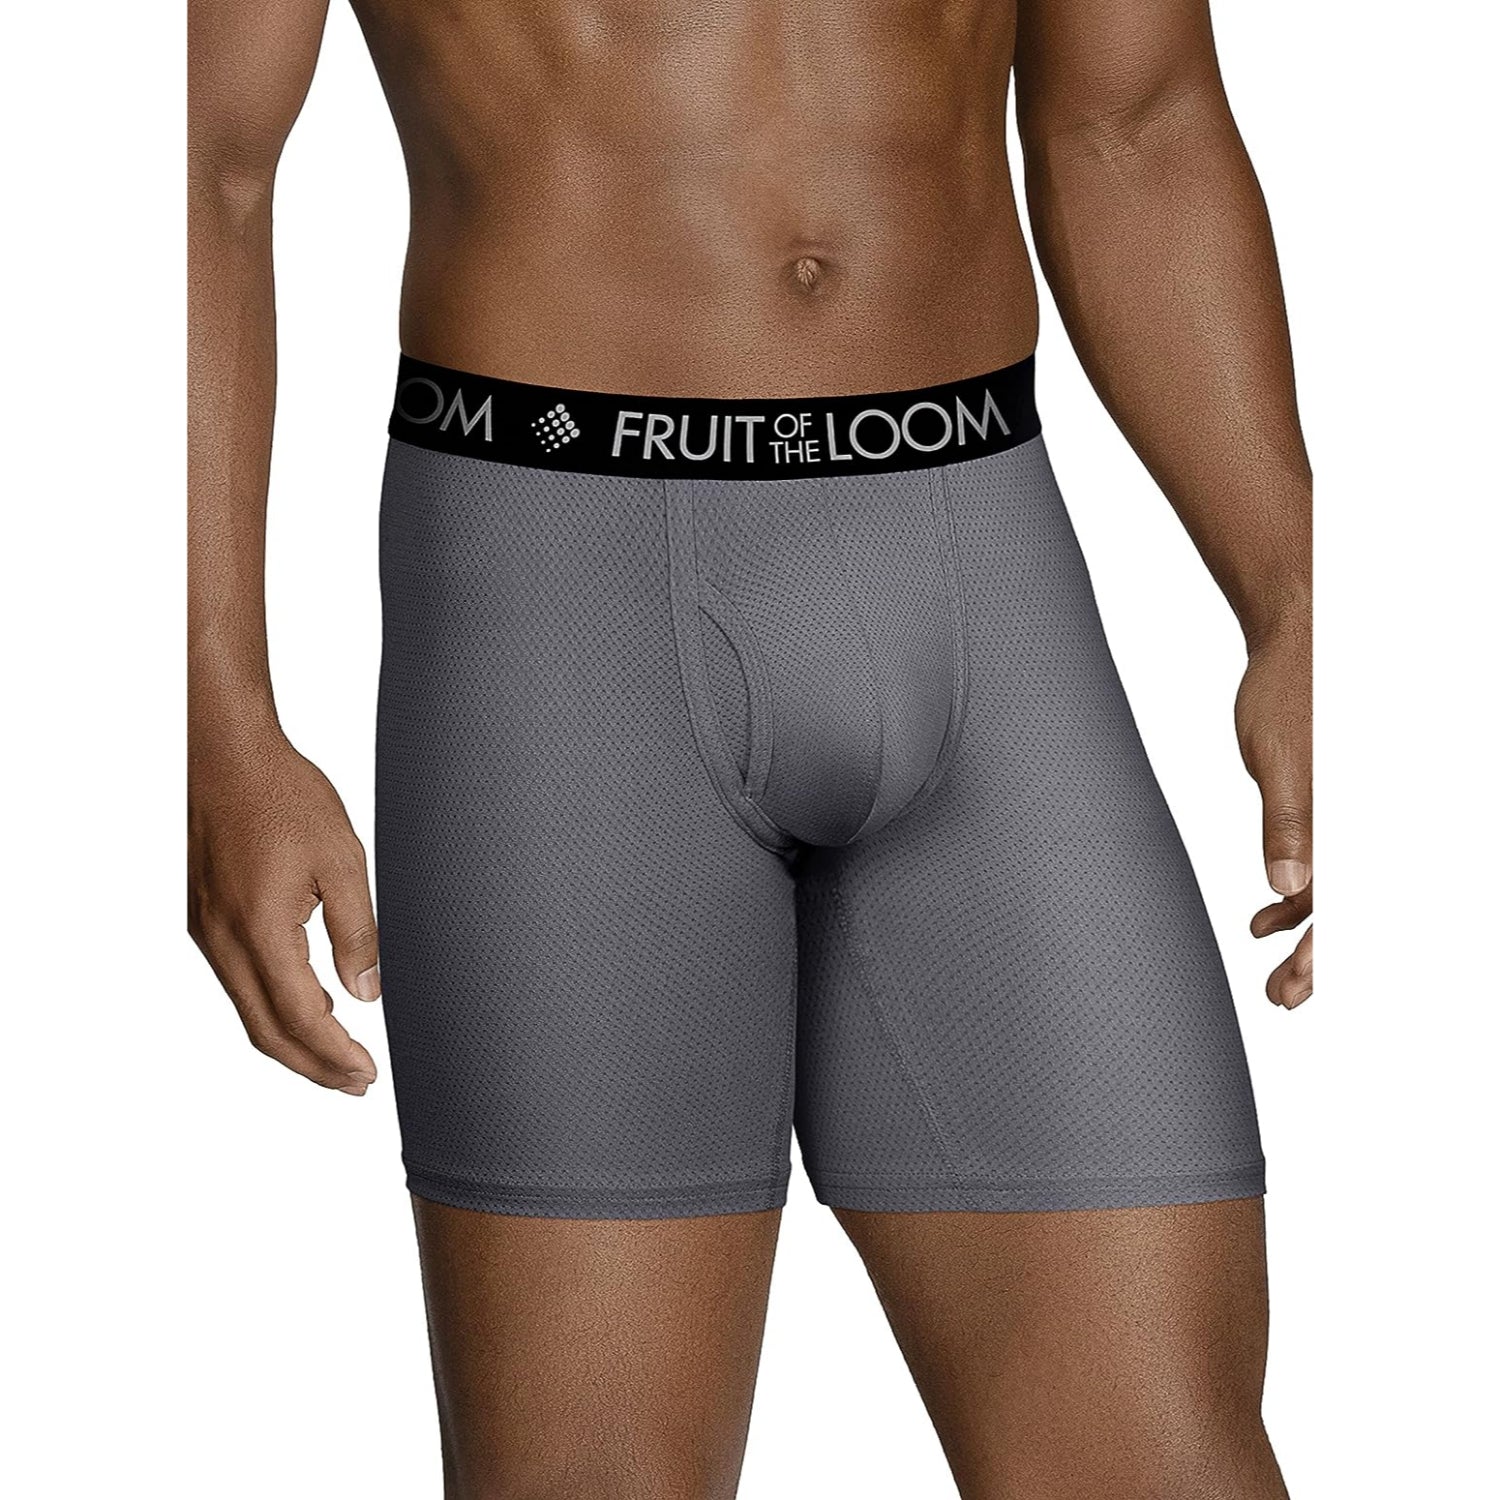 Fruit of the Loom Men's Breathable Cotton Micro-Mesh Briefs, 5